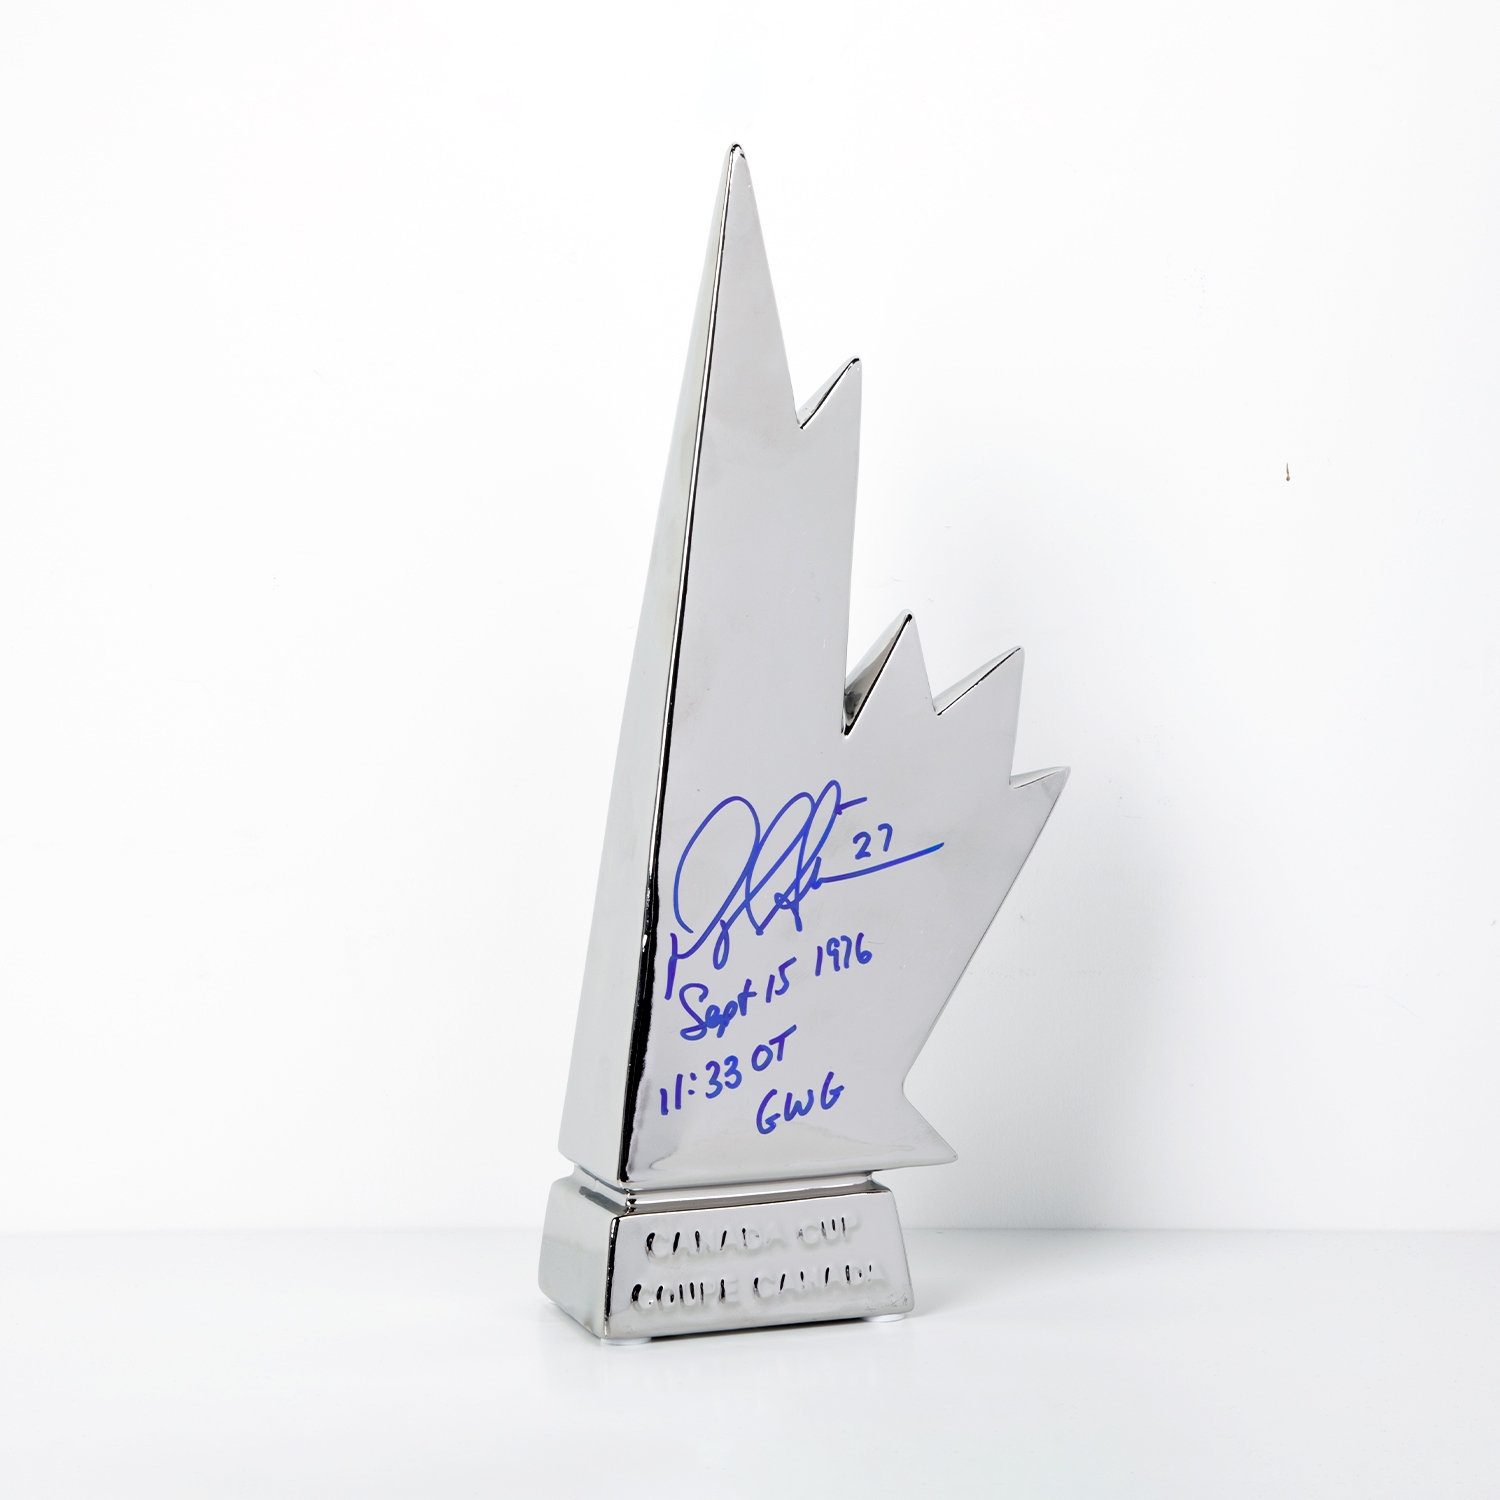 Darryl Sittler Signed And Inscribed Canada Cup Replica Trophy with Goal Note